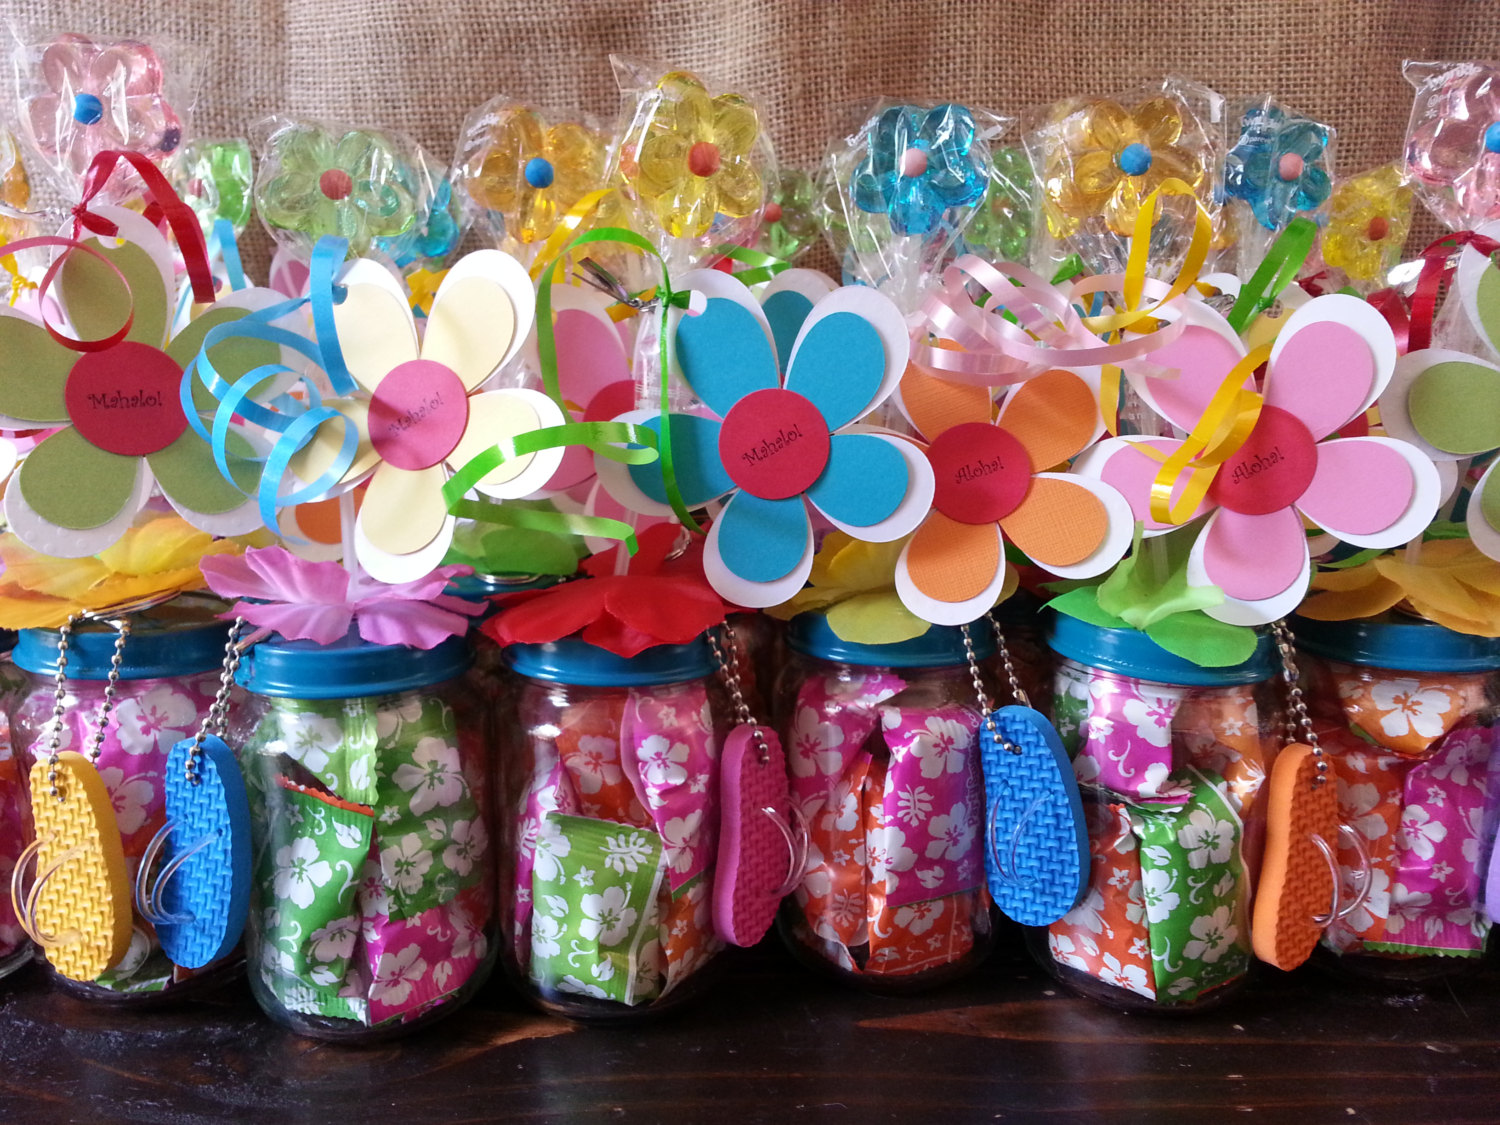 Greatest Birthday Party Favors Kids Want - Baby Couture India